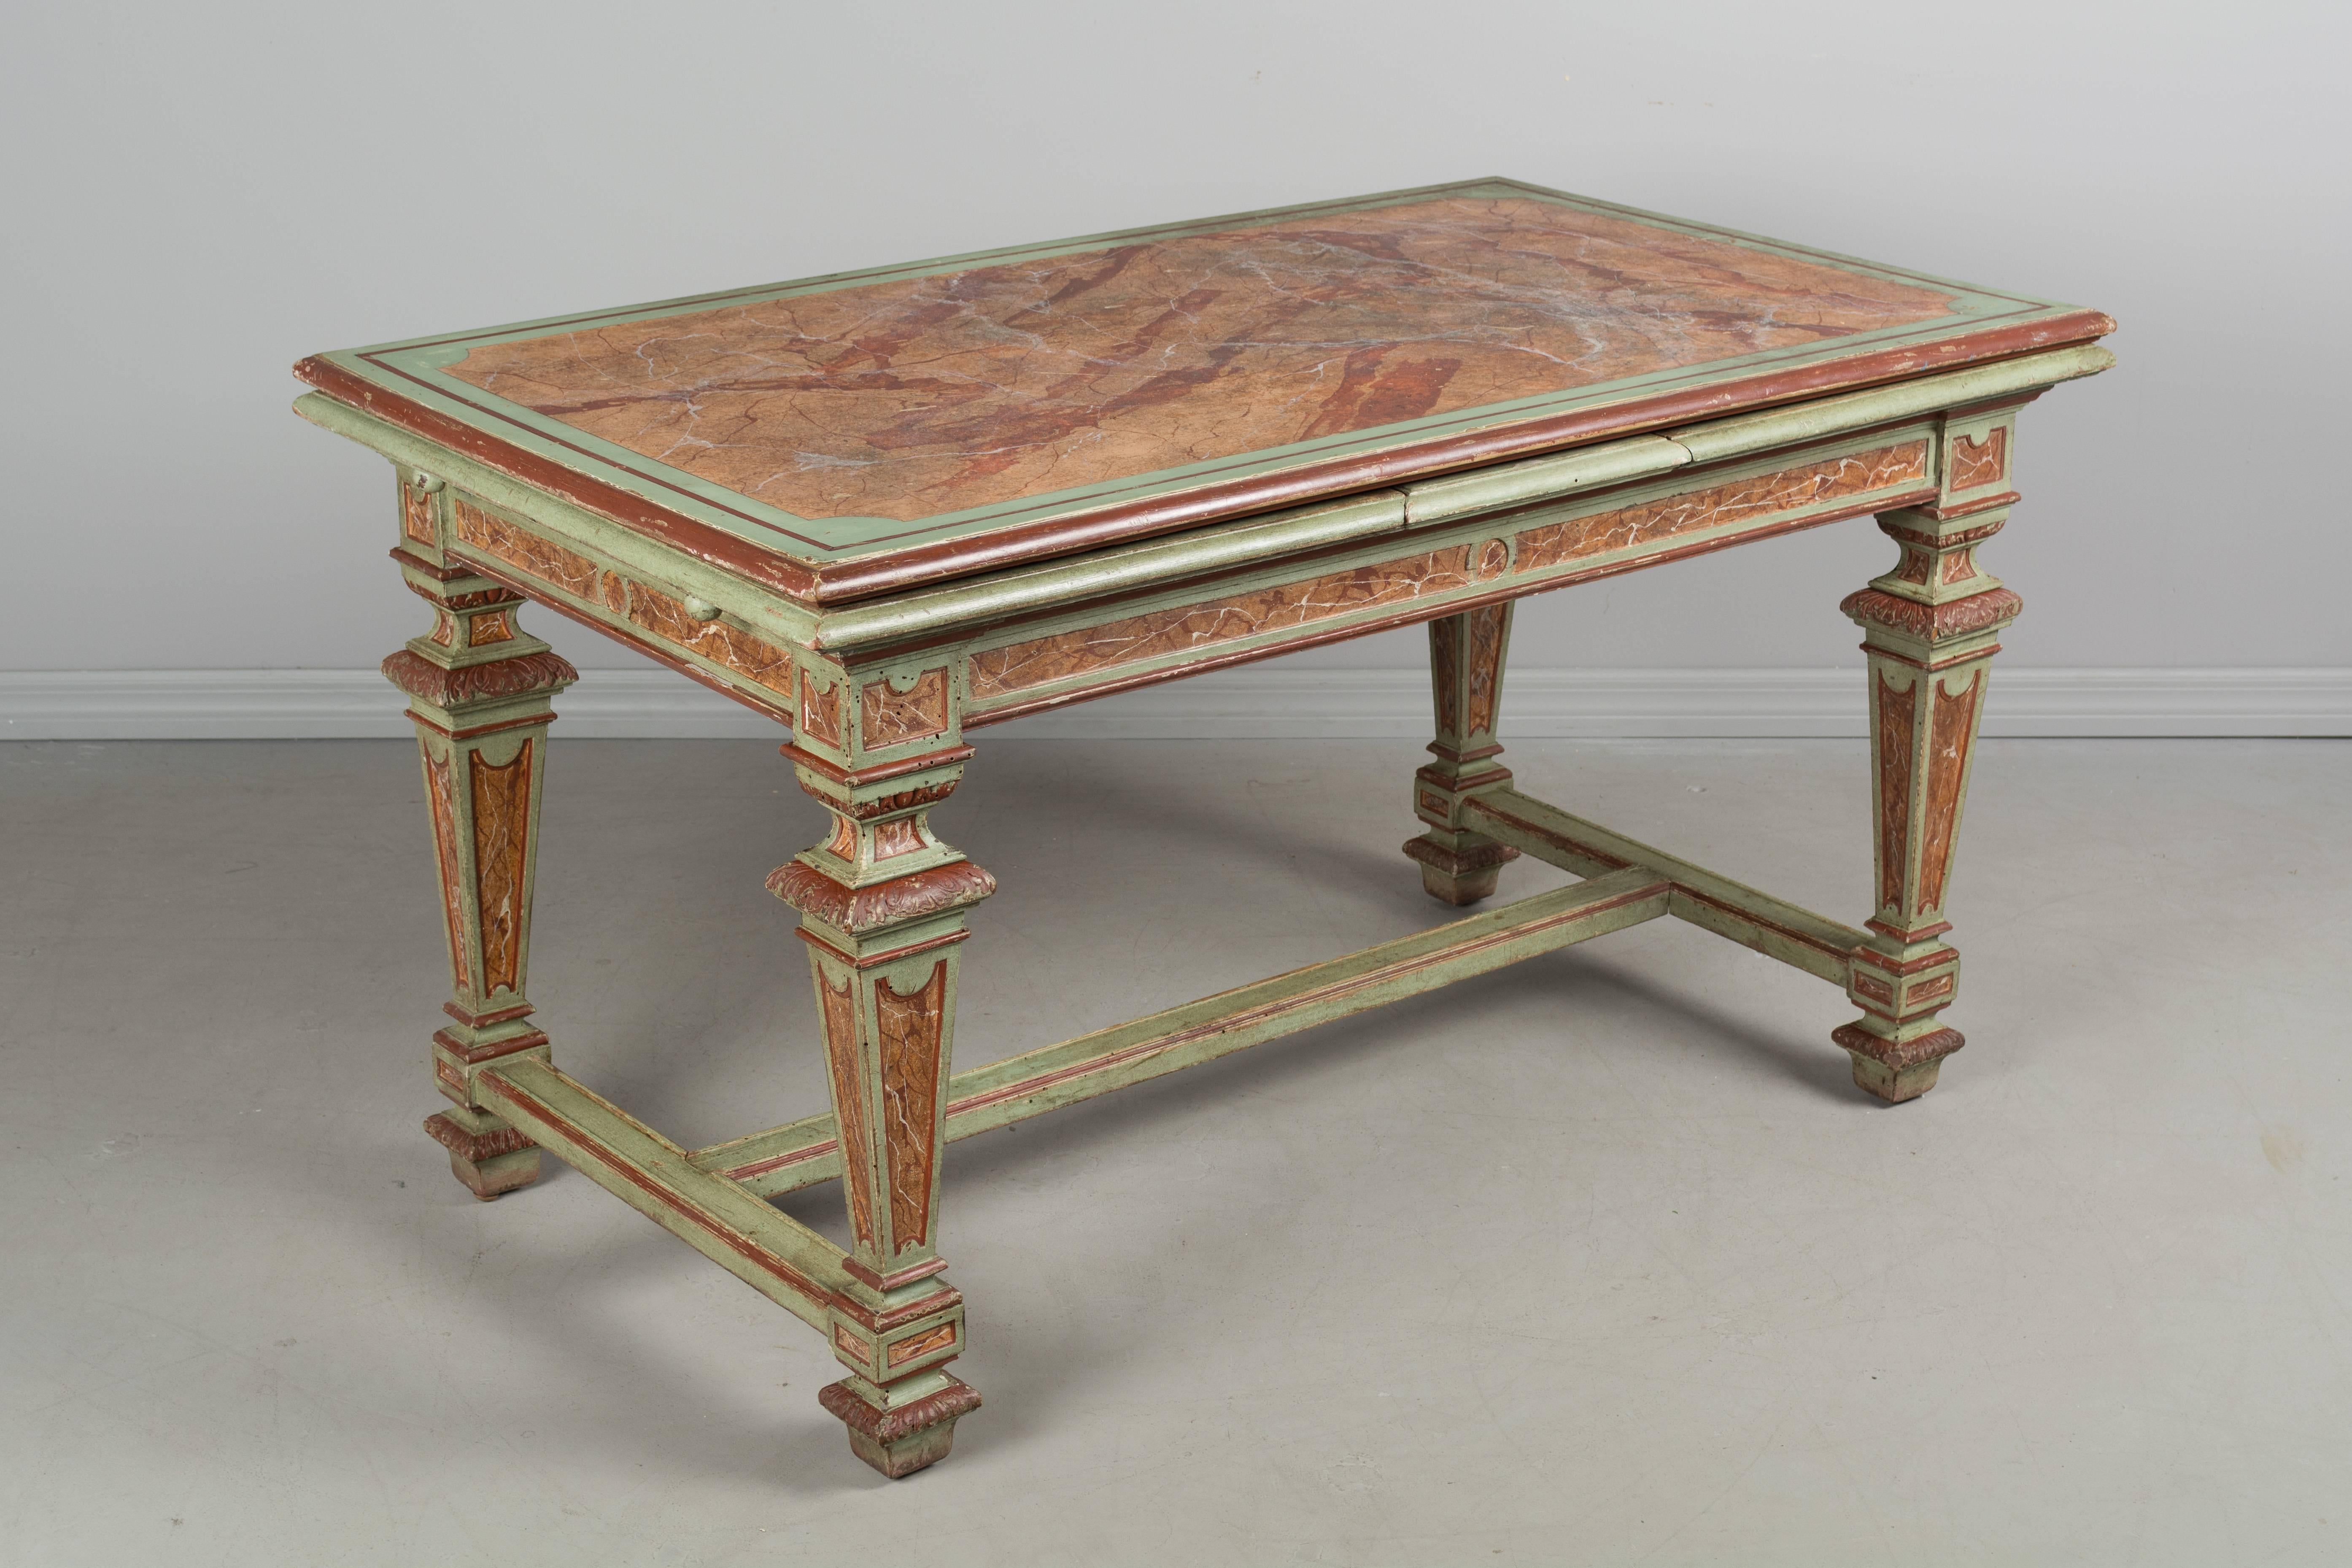 French  Louis XIV style extension table, circa 1900 with faux marble painted finish that was done in the 1950s. Elaborately decorated legs with stretcher. Two extensions with verdigrises painted finish pull-out on the sides. Beautiful old painted